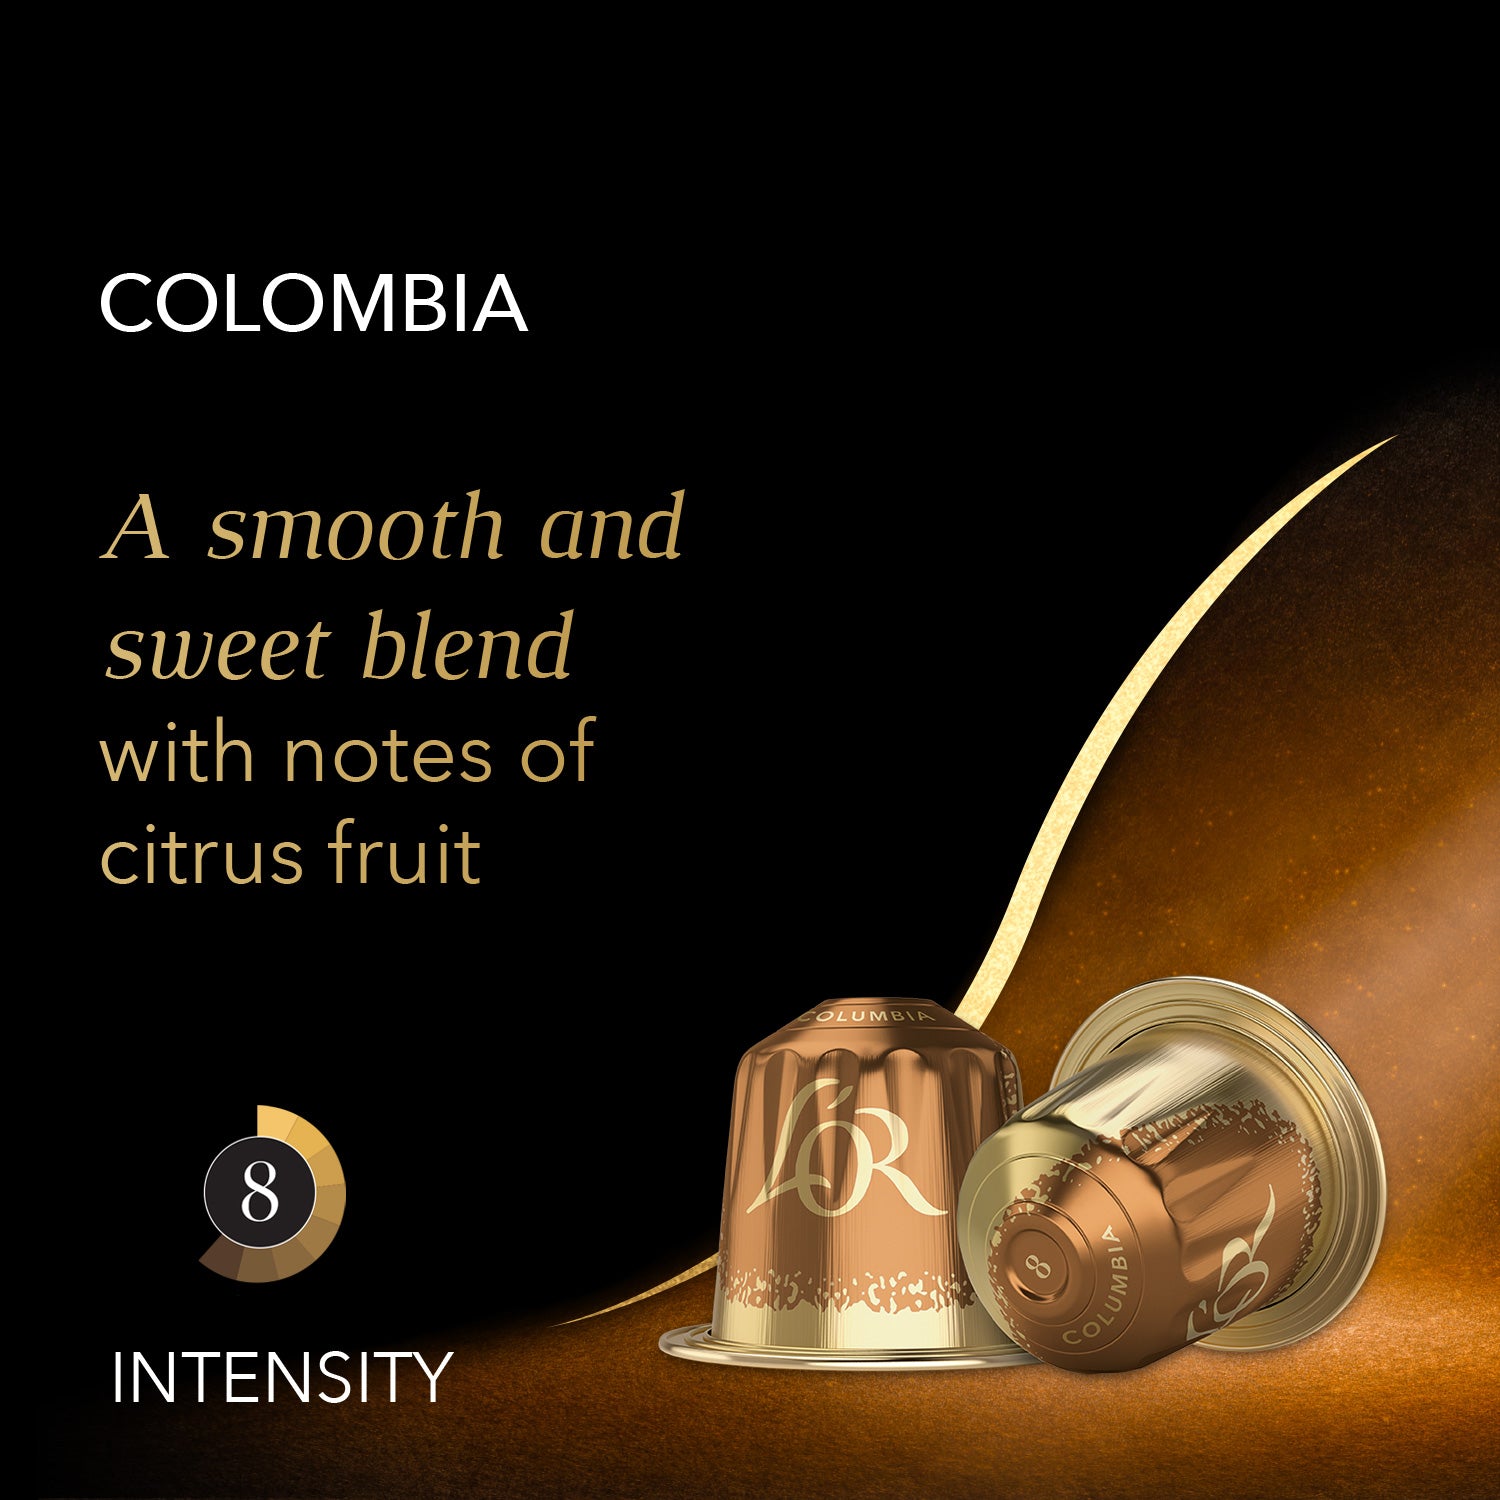 Image that says Colombia is a smooth, sweet blend with notes of citrus fruit.